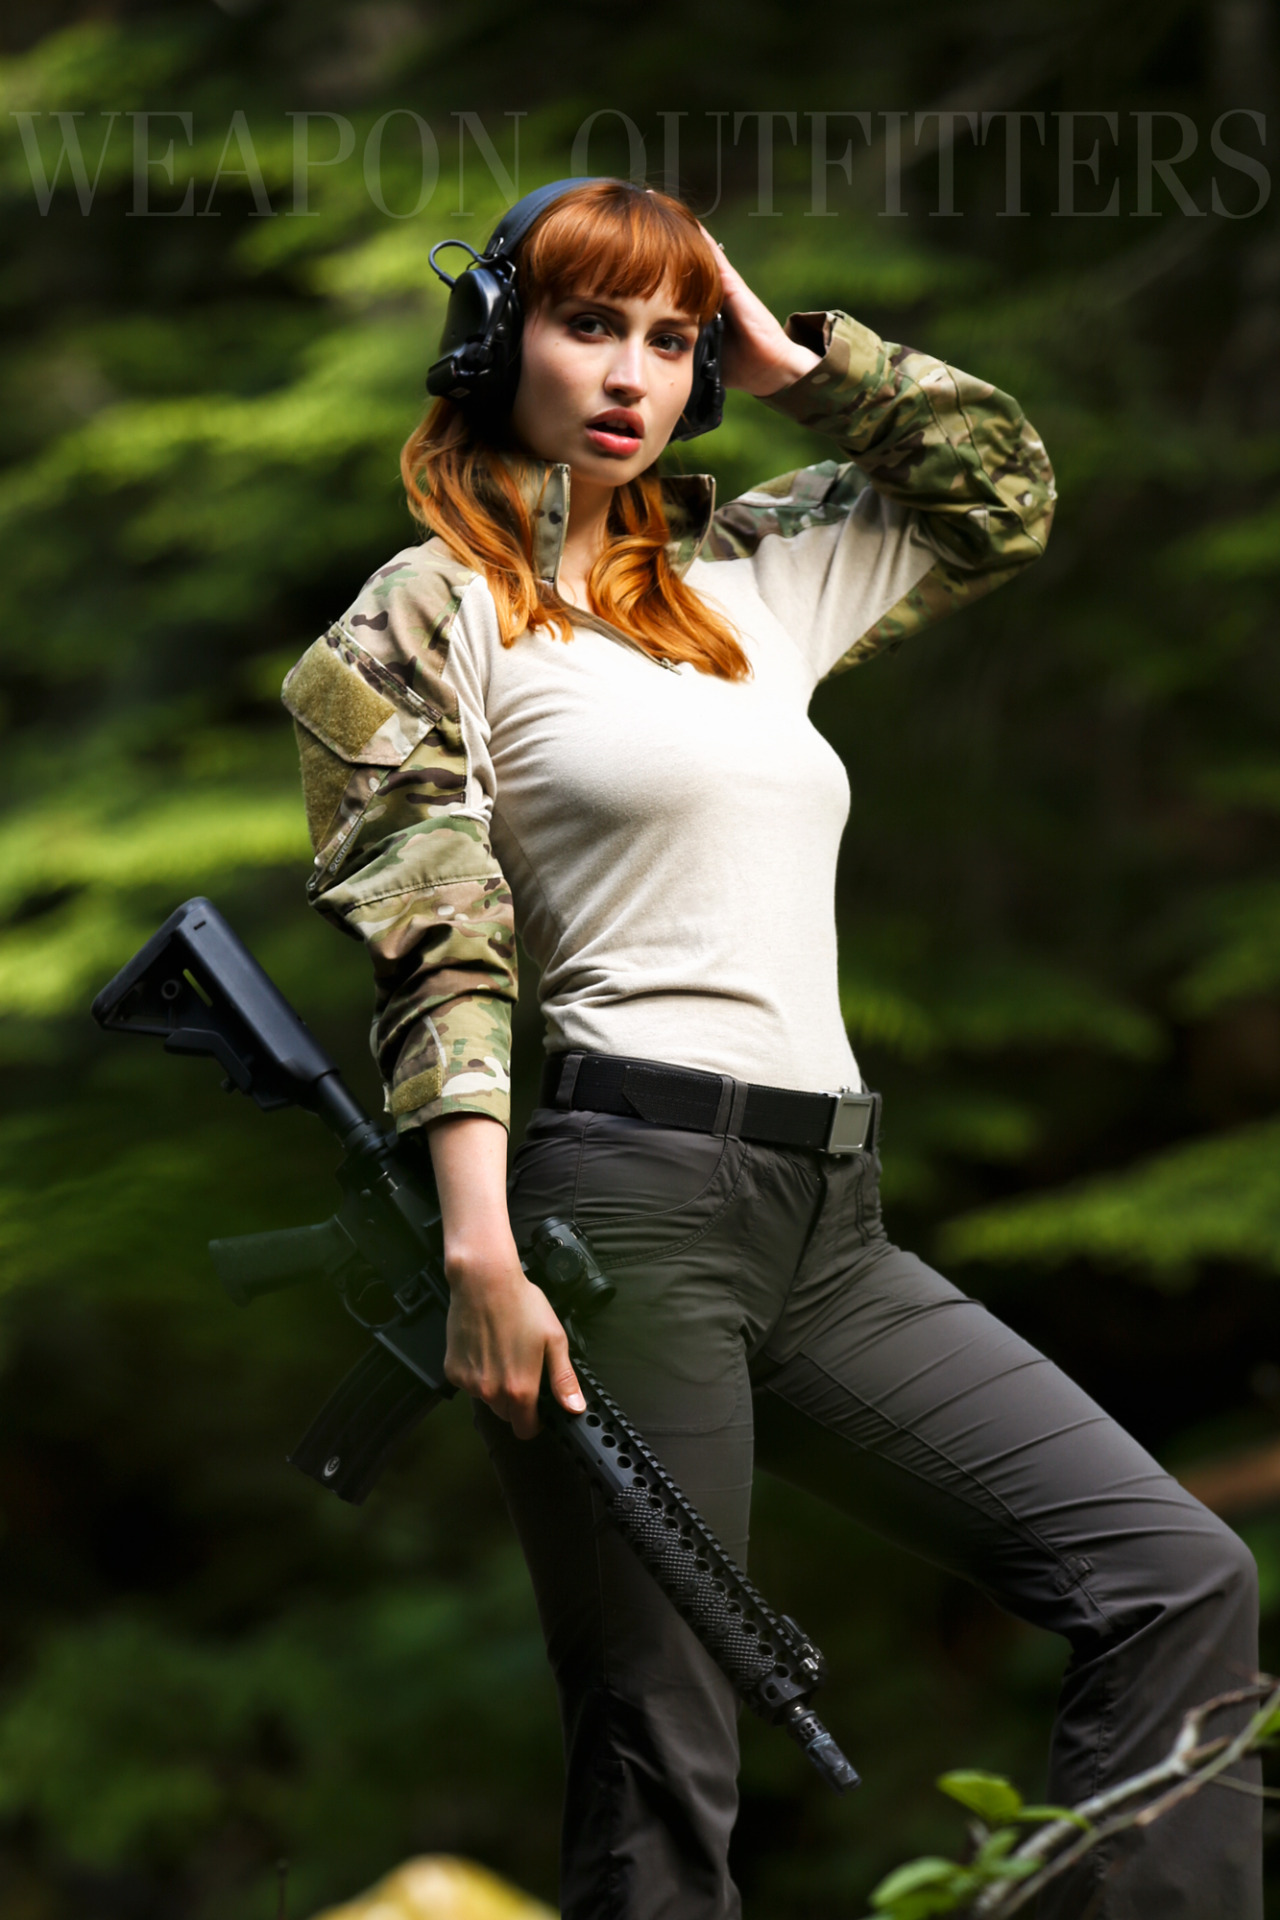 Weapon Outfitters